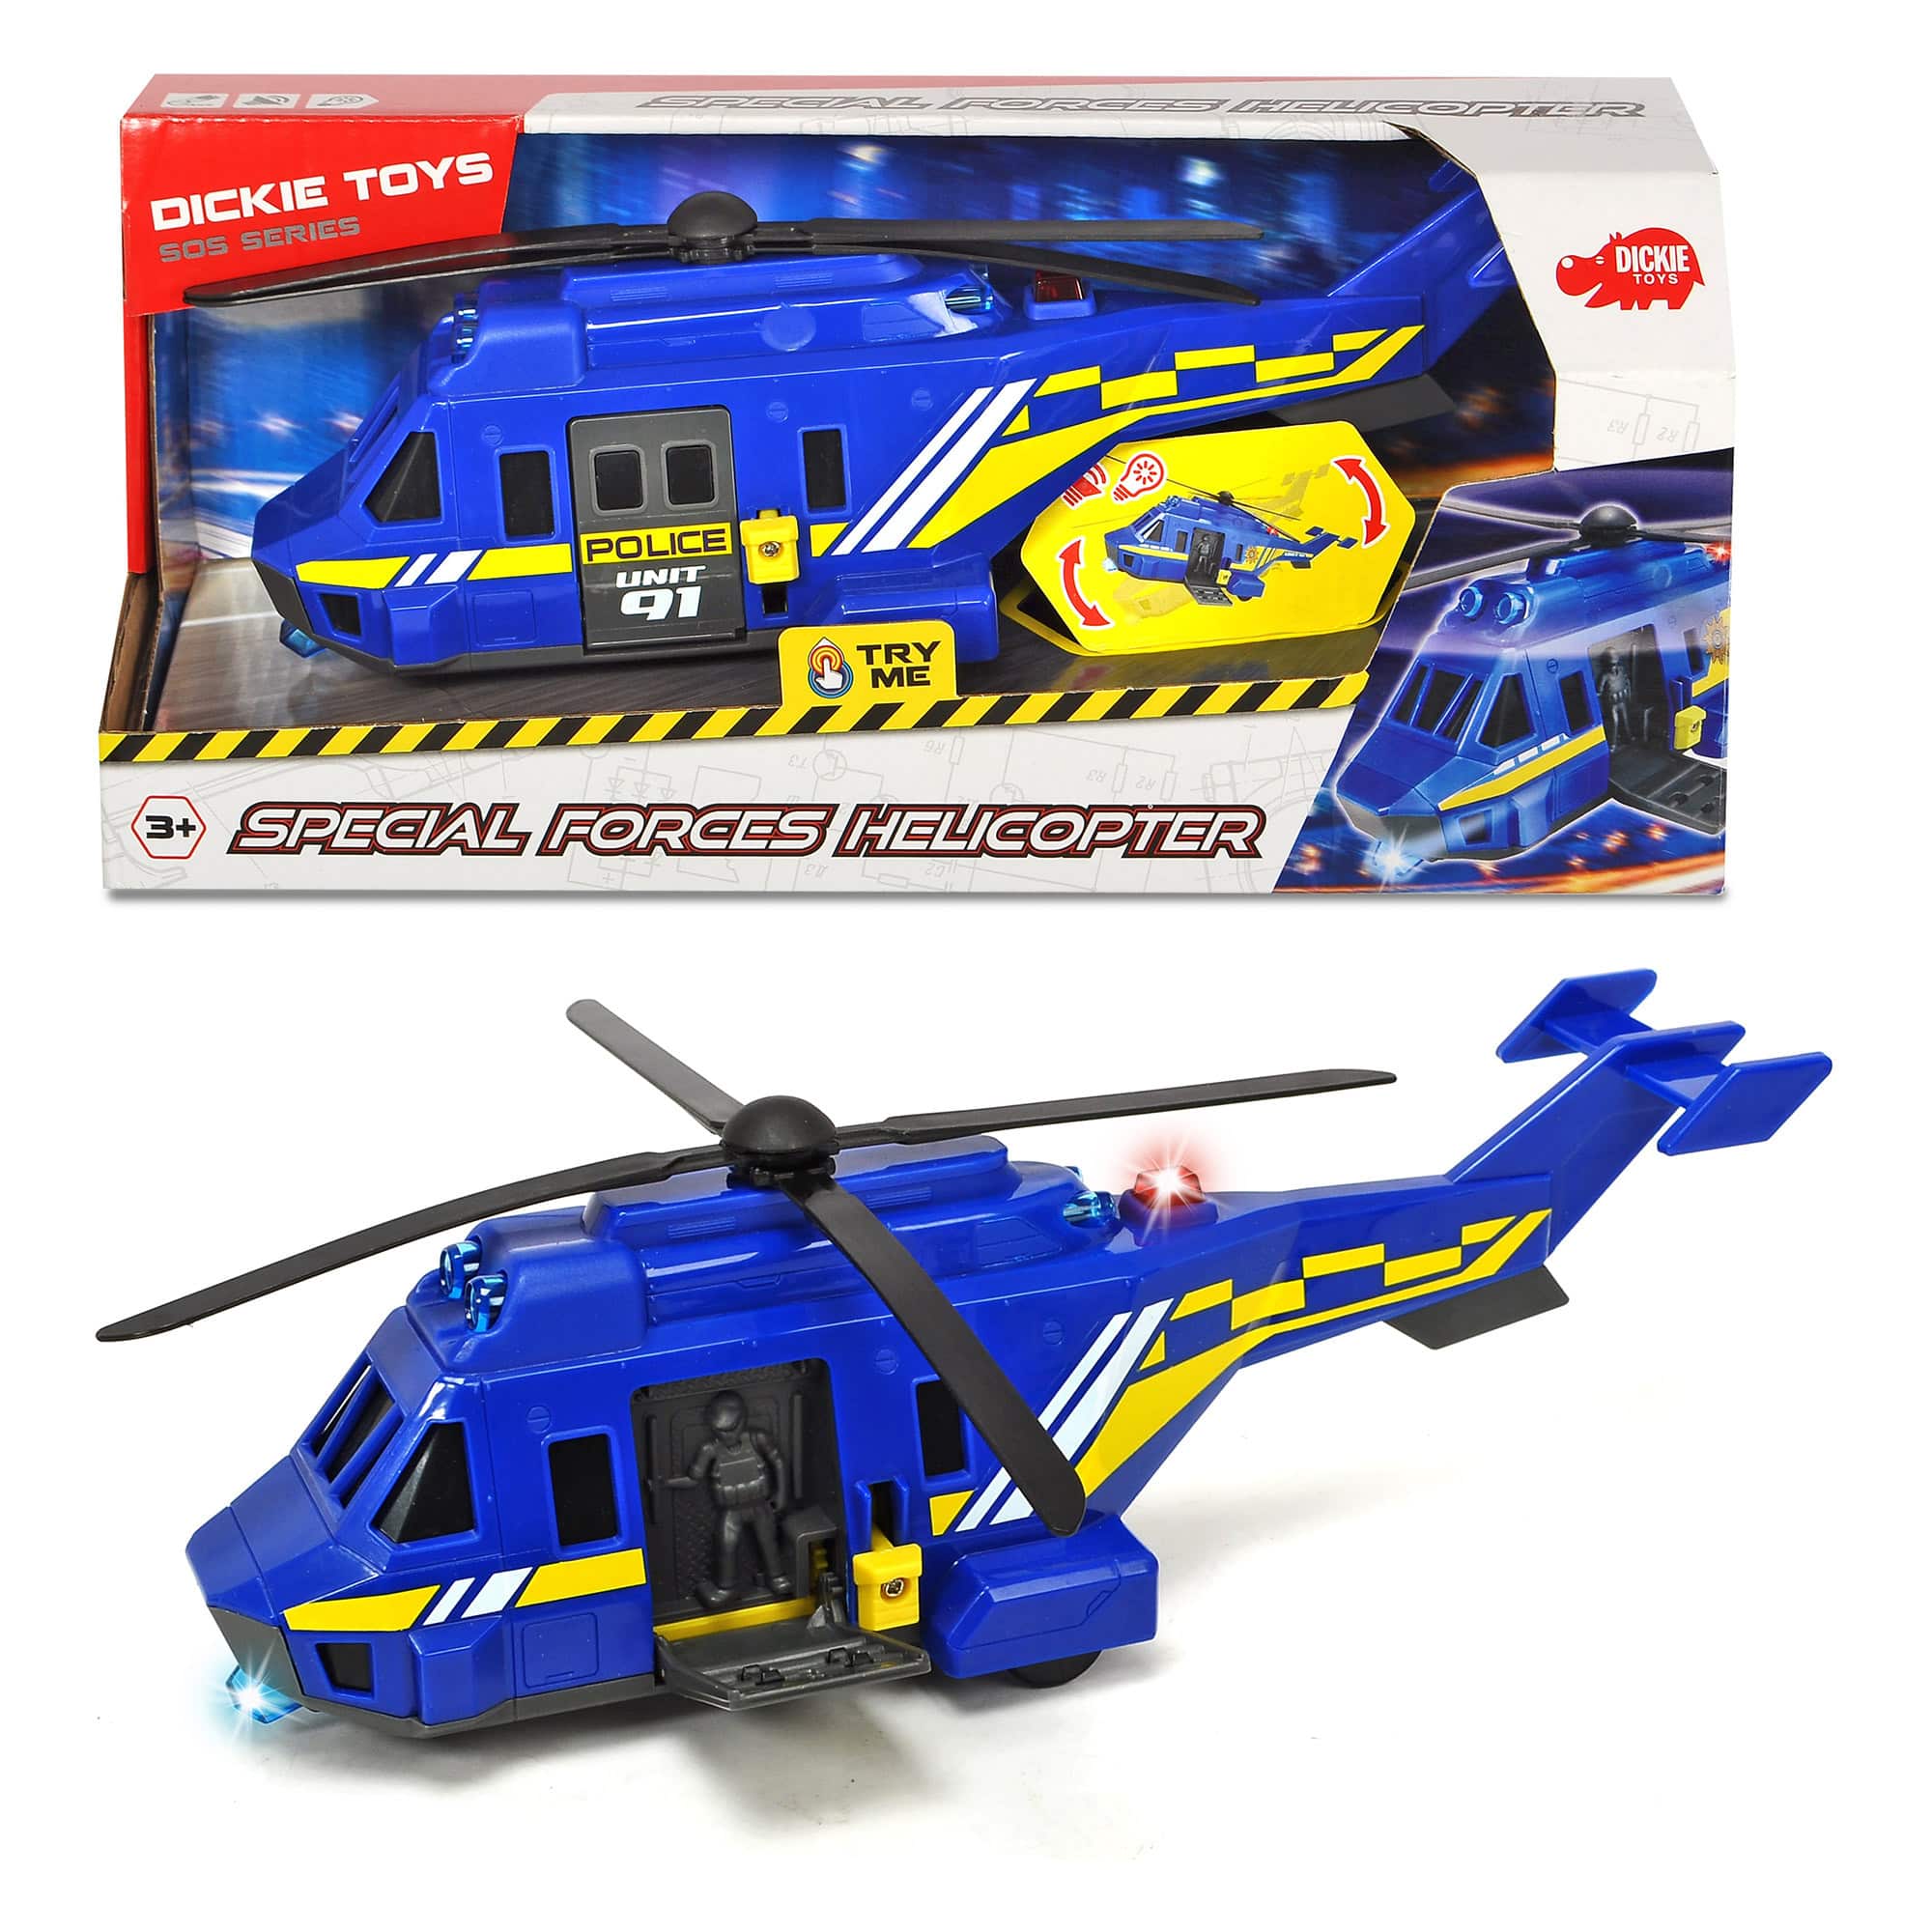 Dickie Toys - Special Forces Helicopter